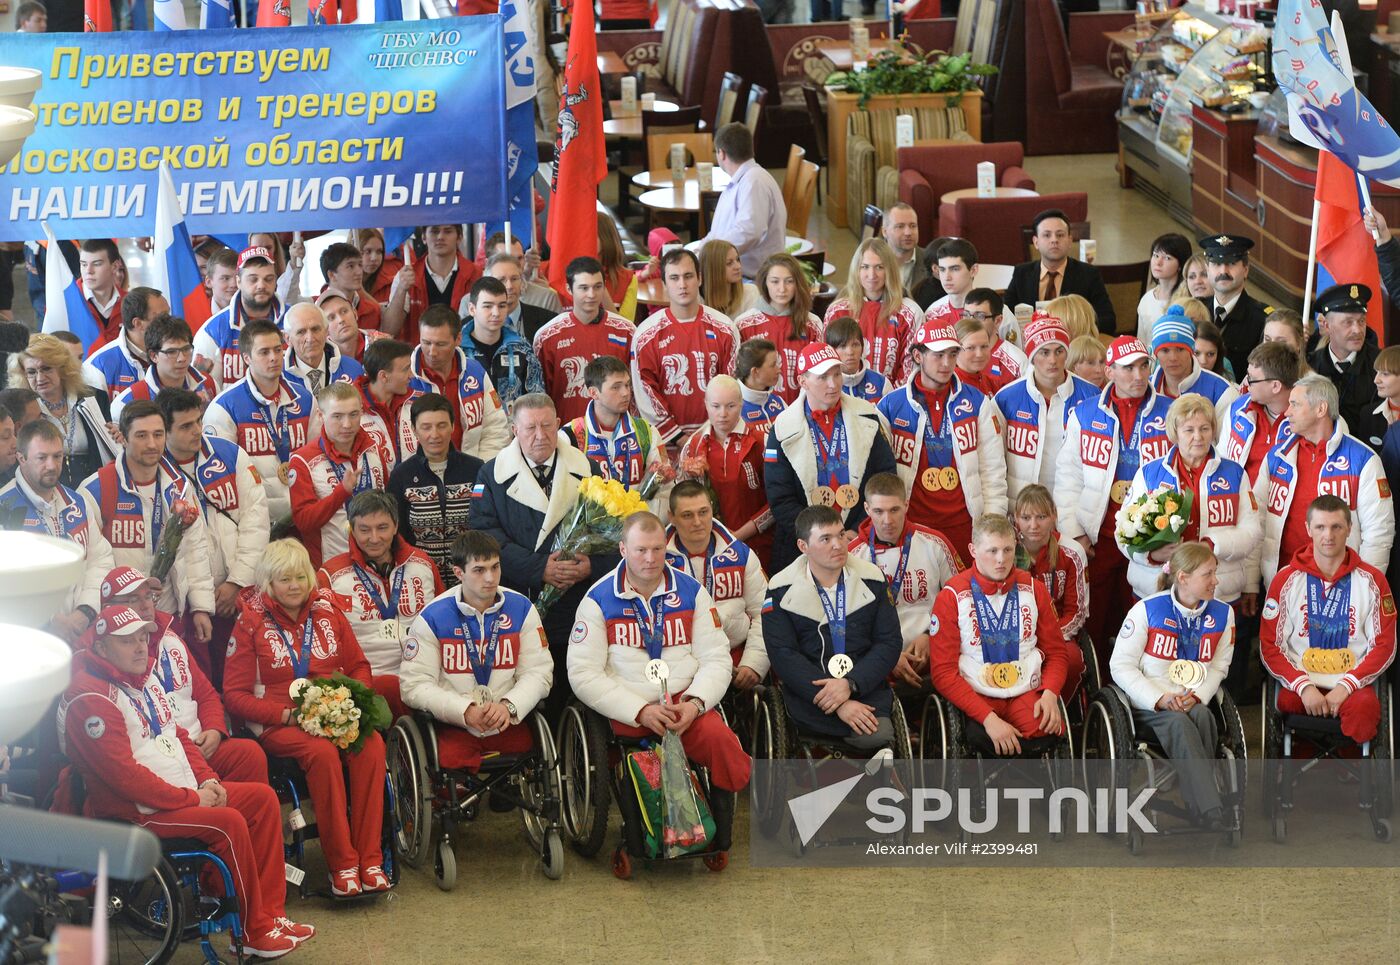 Meeting Paralympics medalists in Moscow